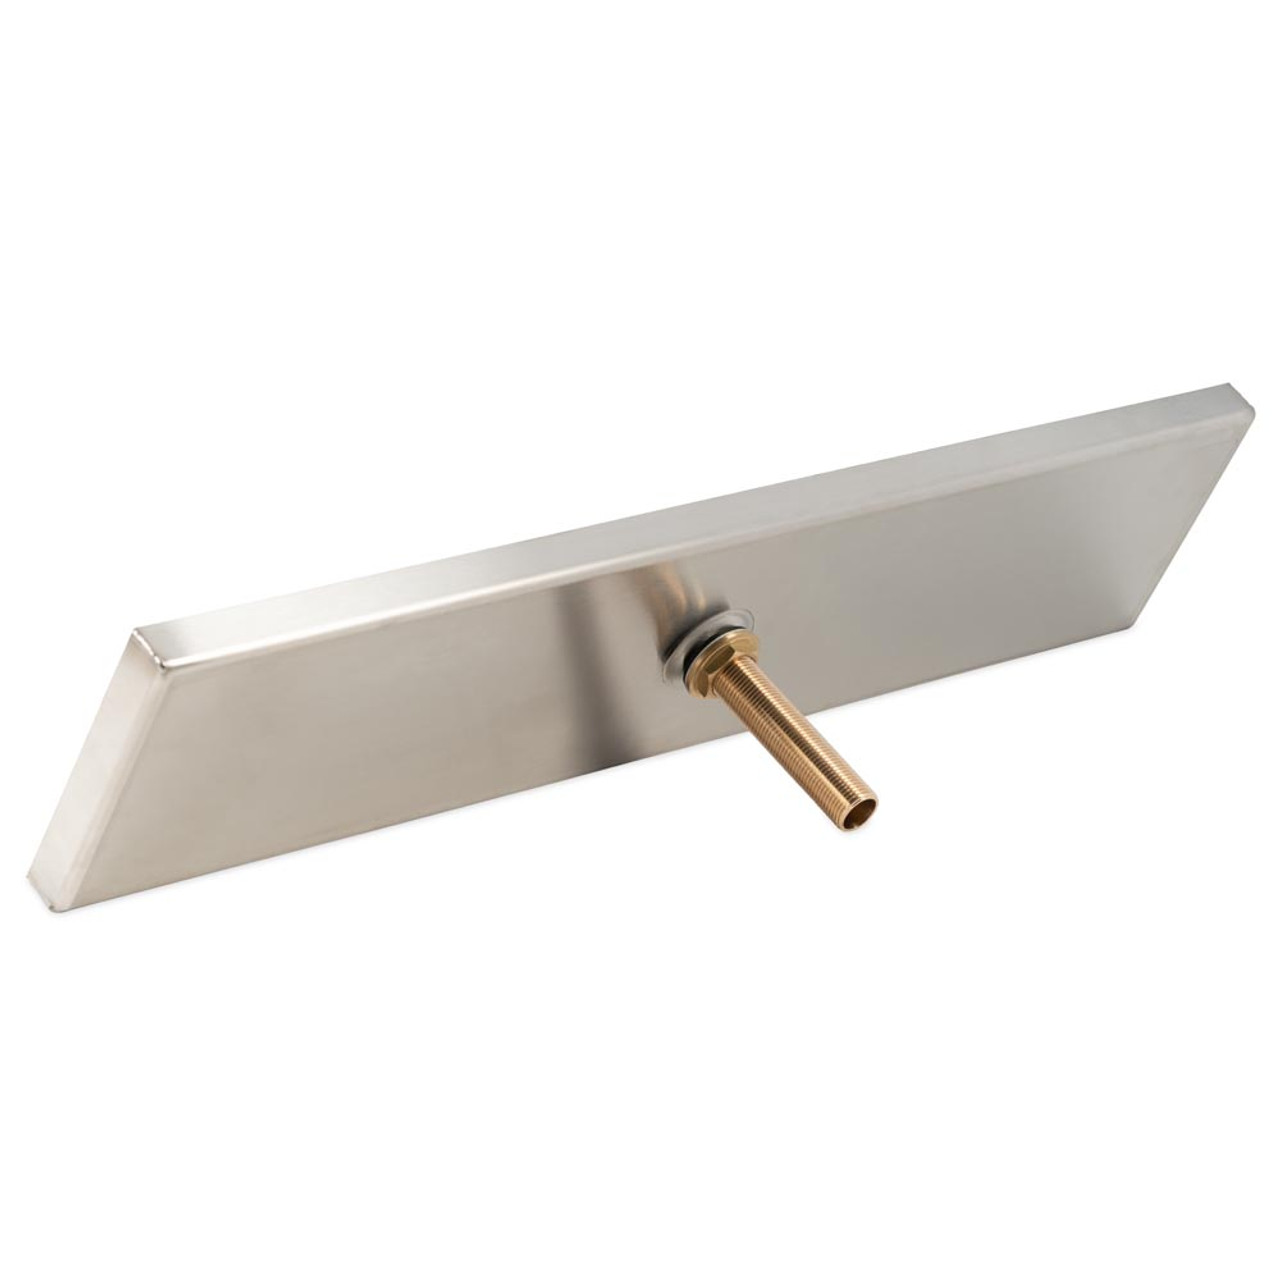 https://cdn11.bigcommerce.com/s-cznxq08r7/images/stencil/1280x1280/products/3809/5871/dt24ss_5-inches_wide_countertop_drip_trays_for_t_towers-with_drain_-_24-inches_0007__60789.1590770175.jpg?c=1